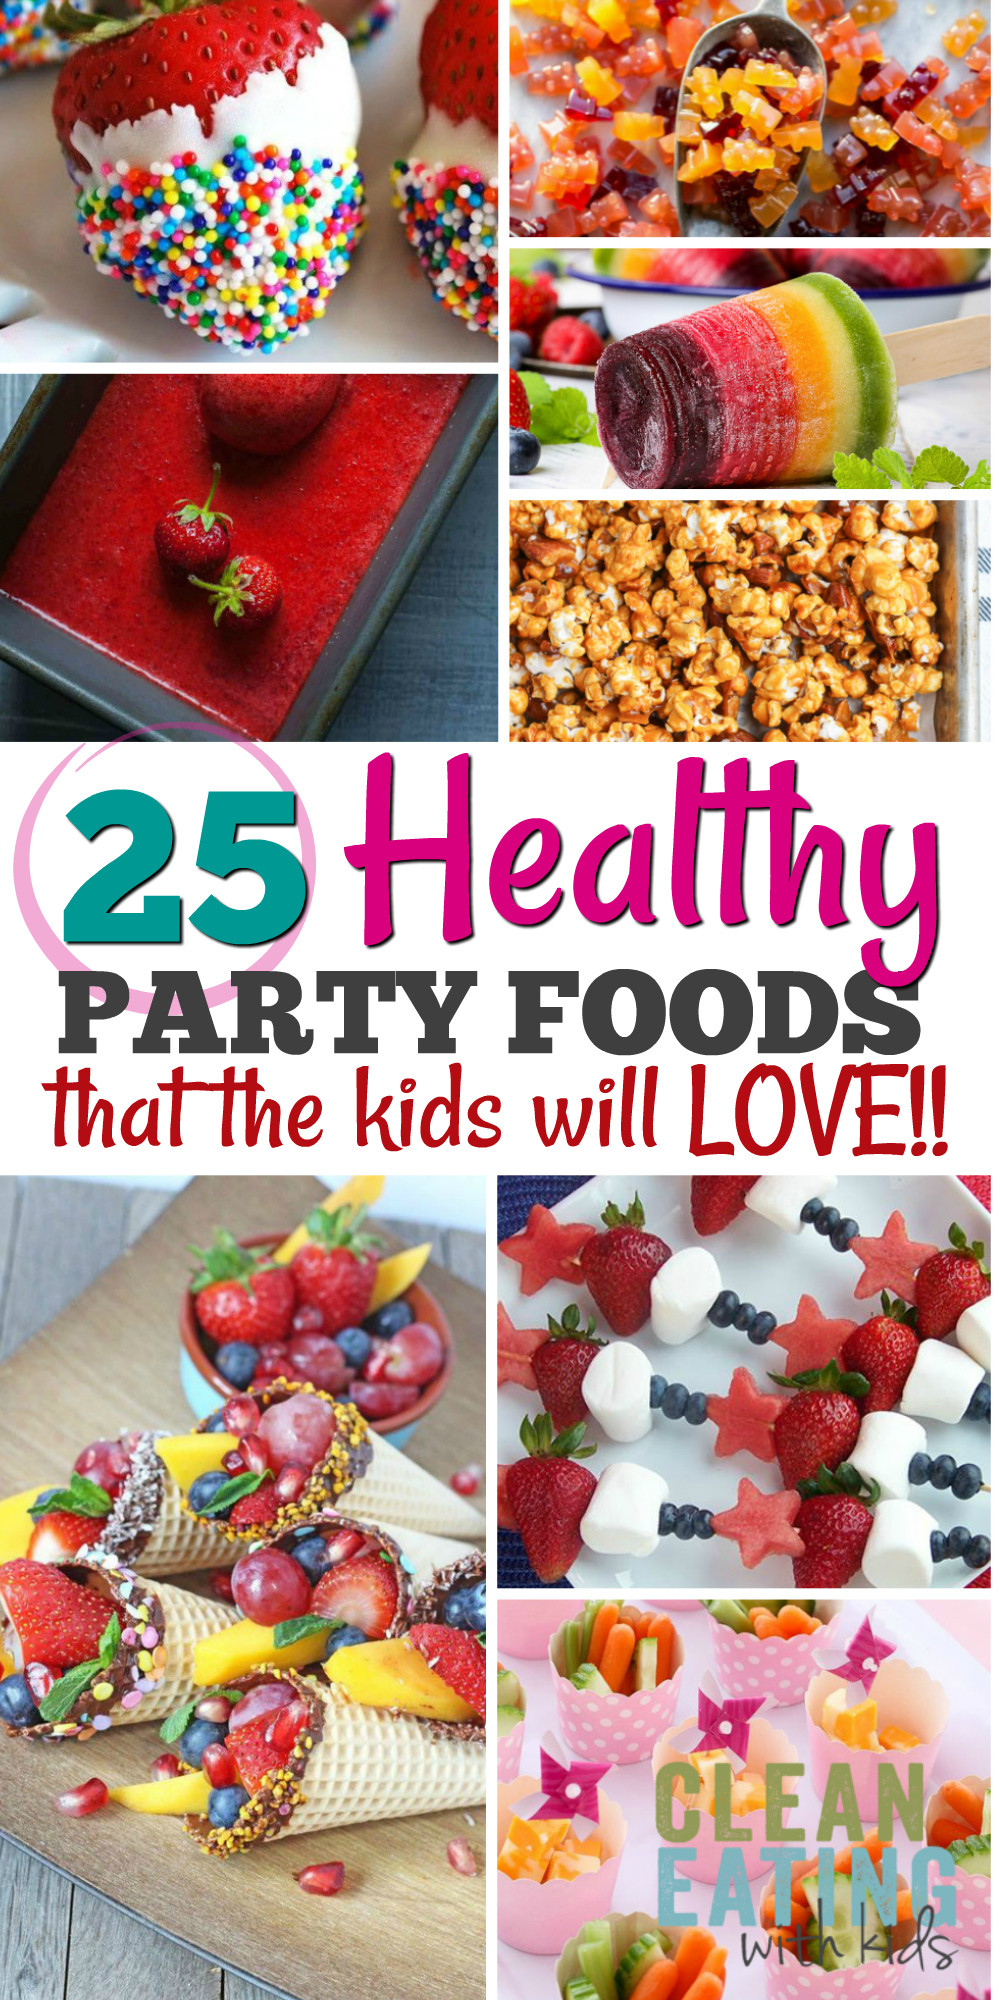 Kid Birthday Party Ideas
 25 Healthy Birthday Party Food Ideas Clean Eating with kids